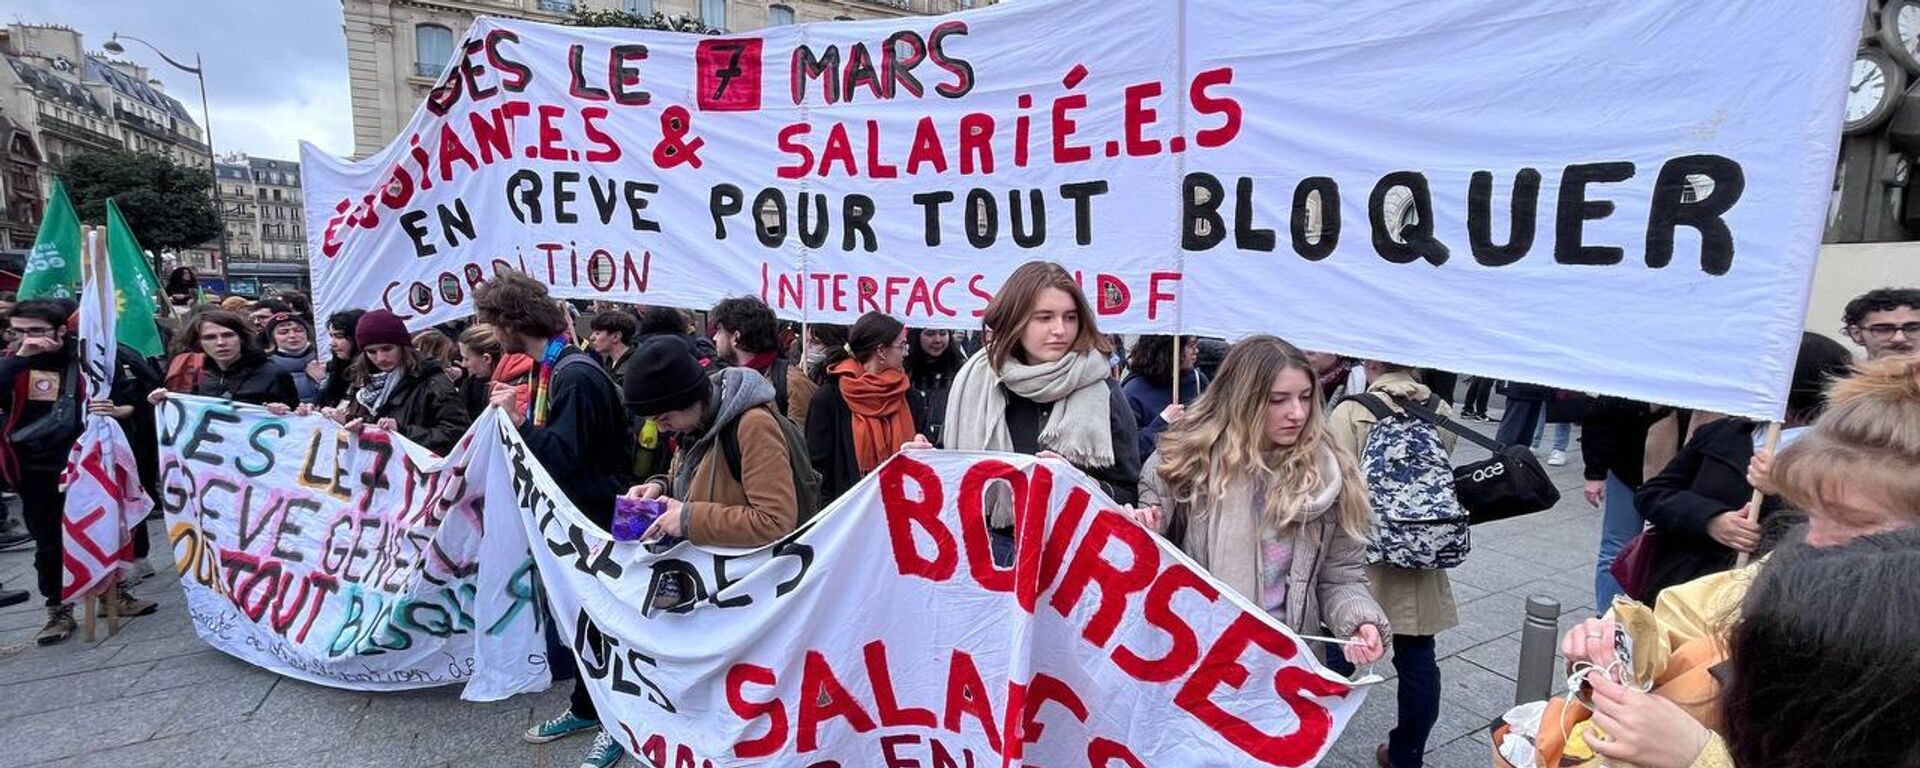 Student associations and high school pupils take to the streets of Paris to protest against the Emmanuel Macron government's pension reform. - Sputnik International, 1920, 11.03.2023